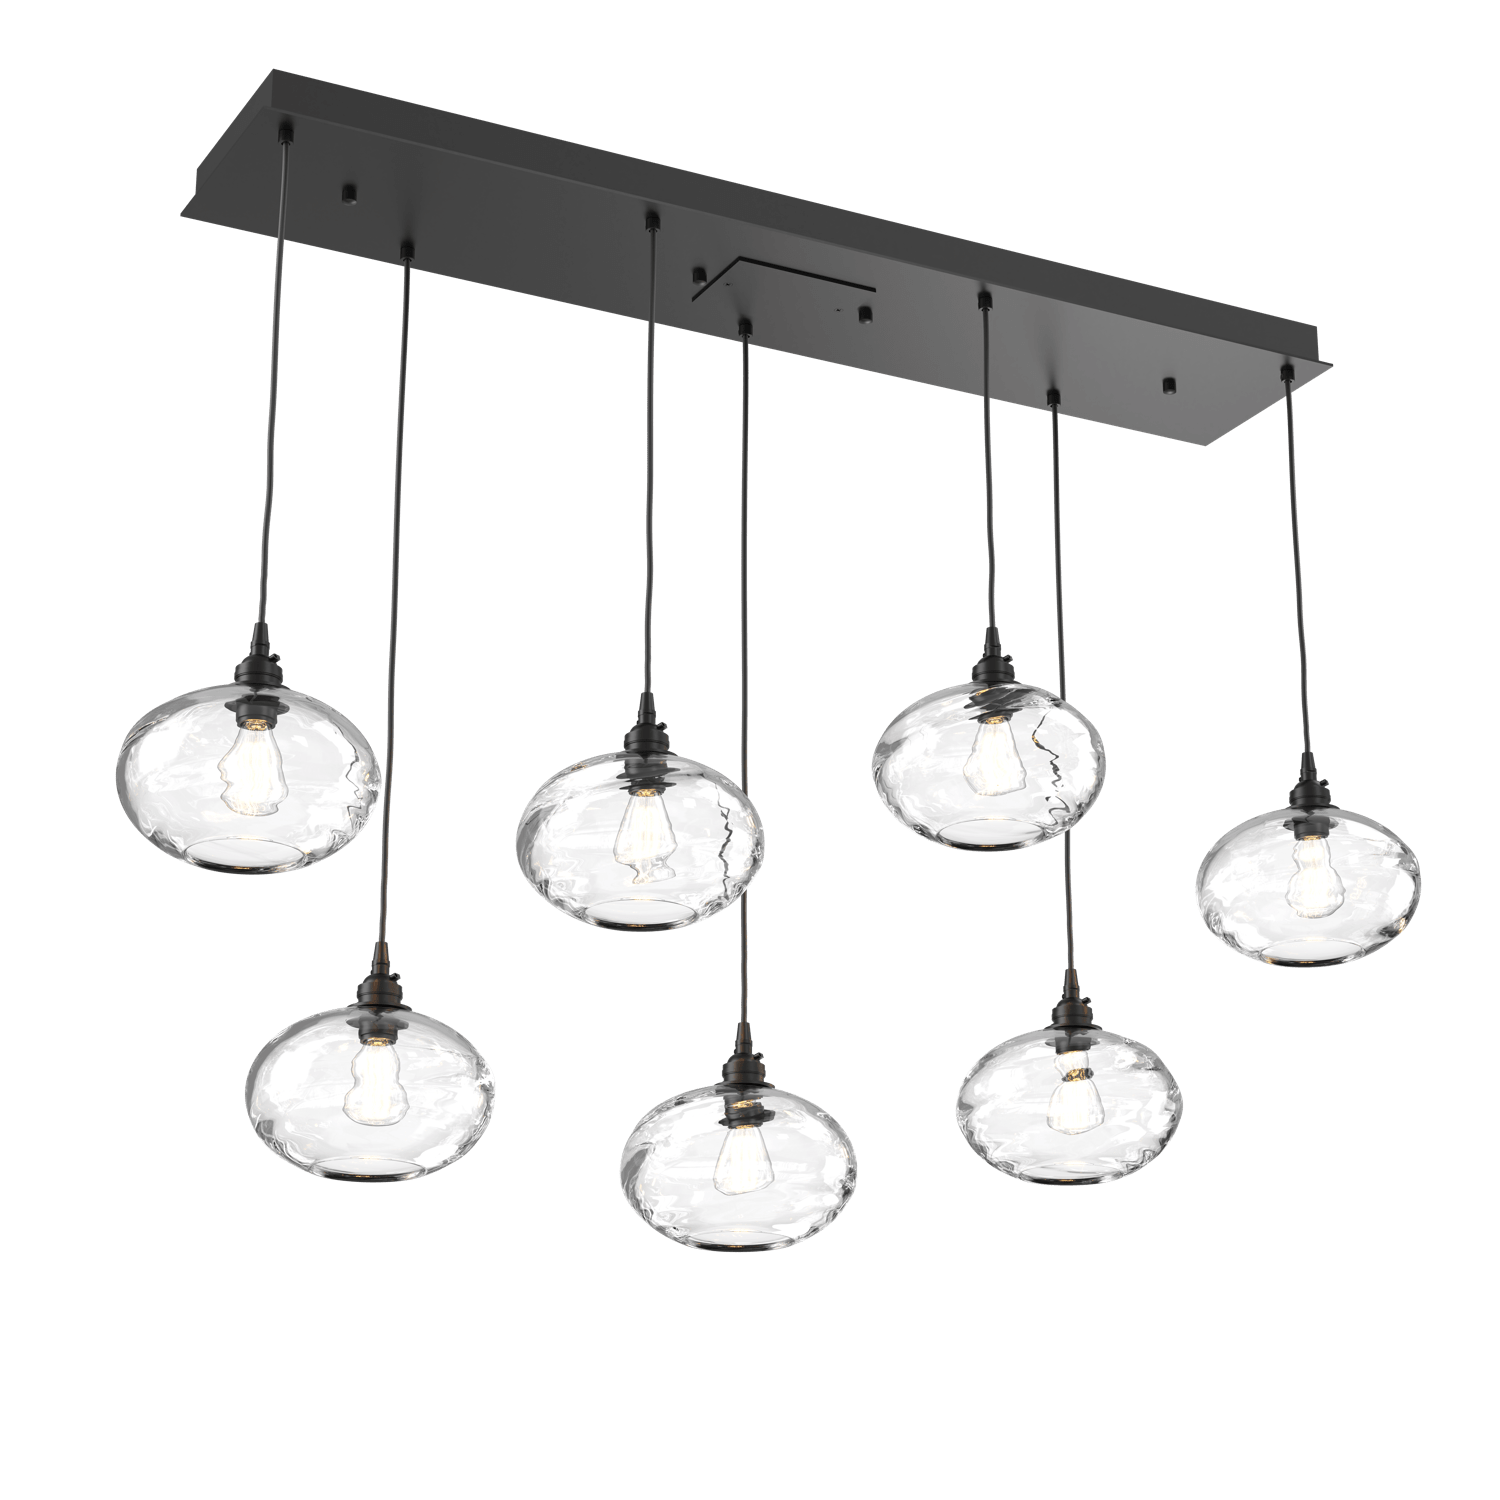 PLB0036-07-MB-OC-Hammerton-Studio-Optic-Blown-Glass-Coppa-7-light-linear-pendant-chandelier-with-matte-black-finish-and-optic-clear-blown-glass-shades-and-incandescent-lamping